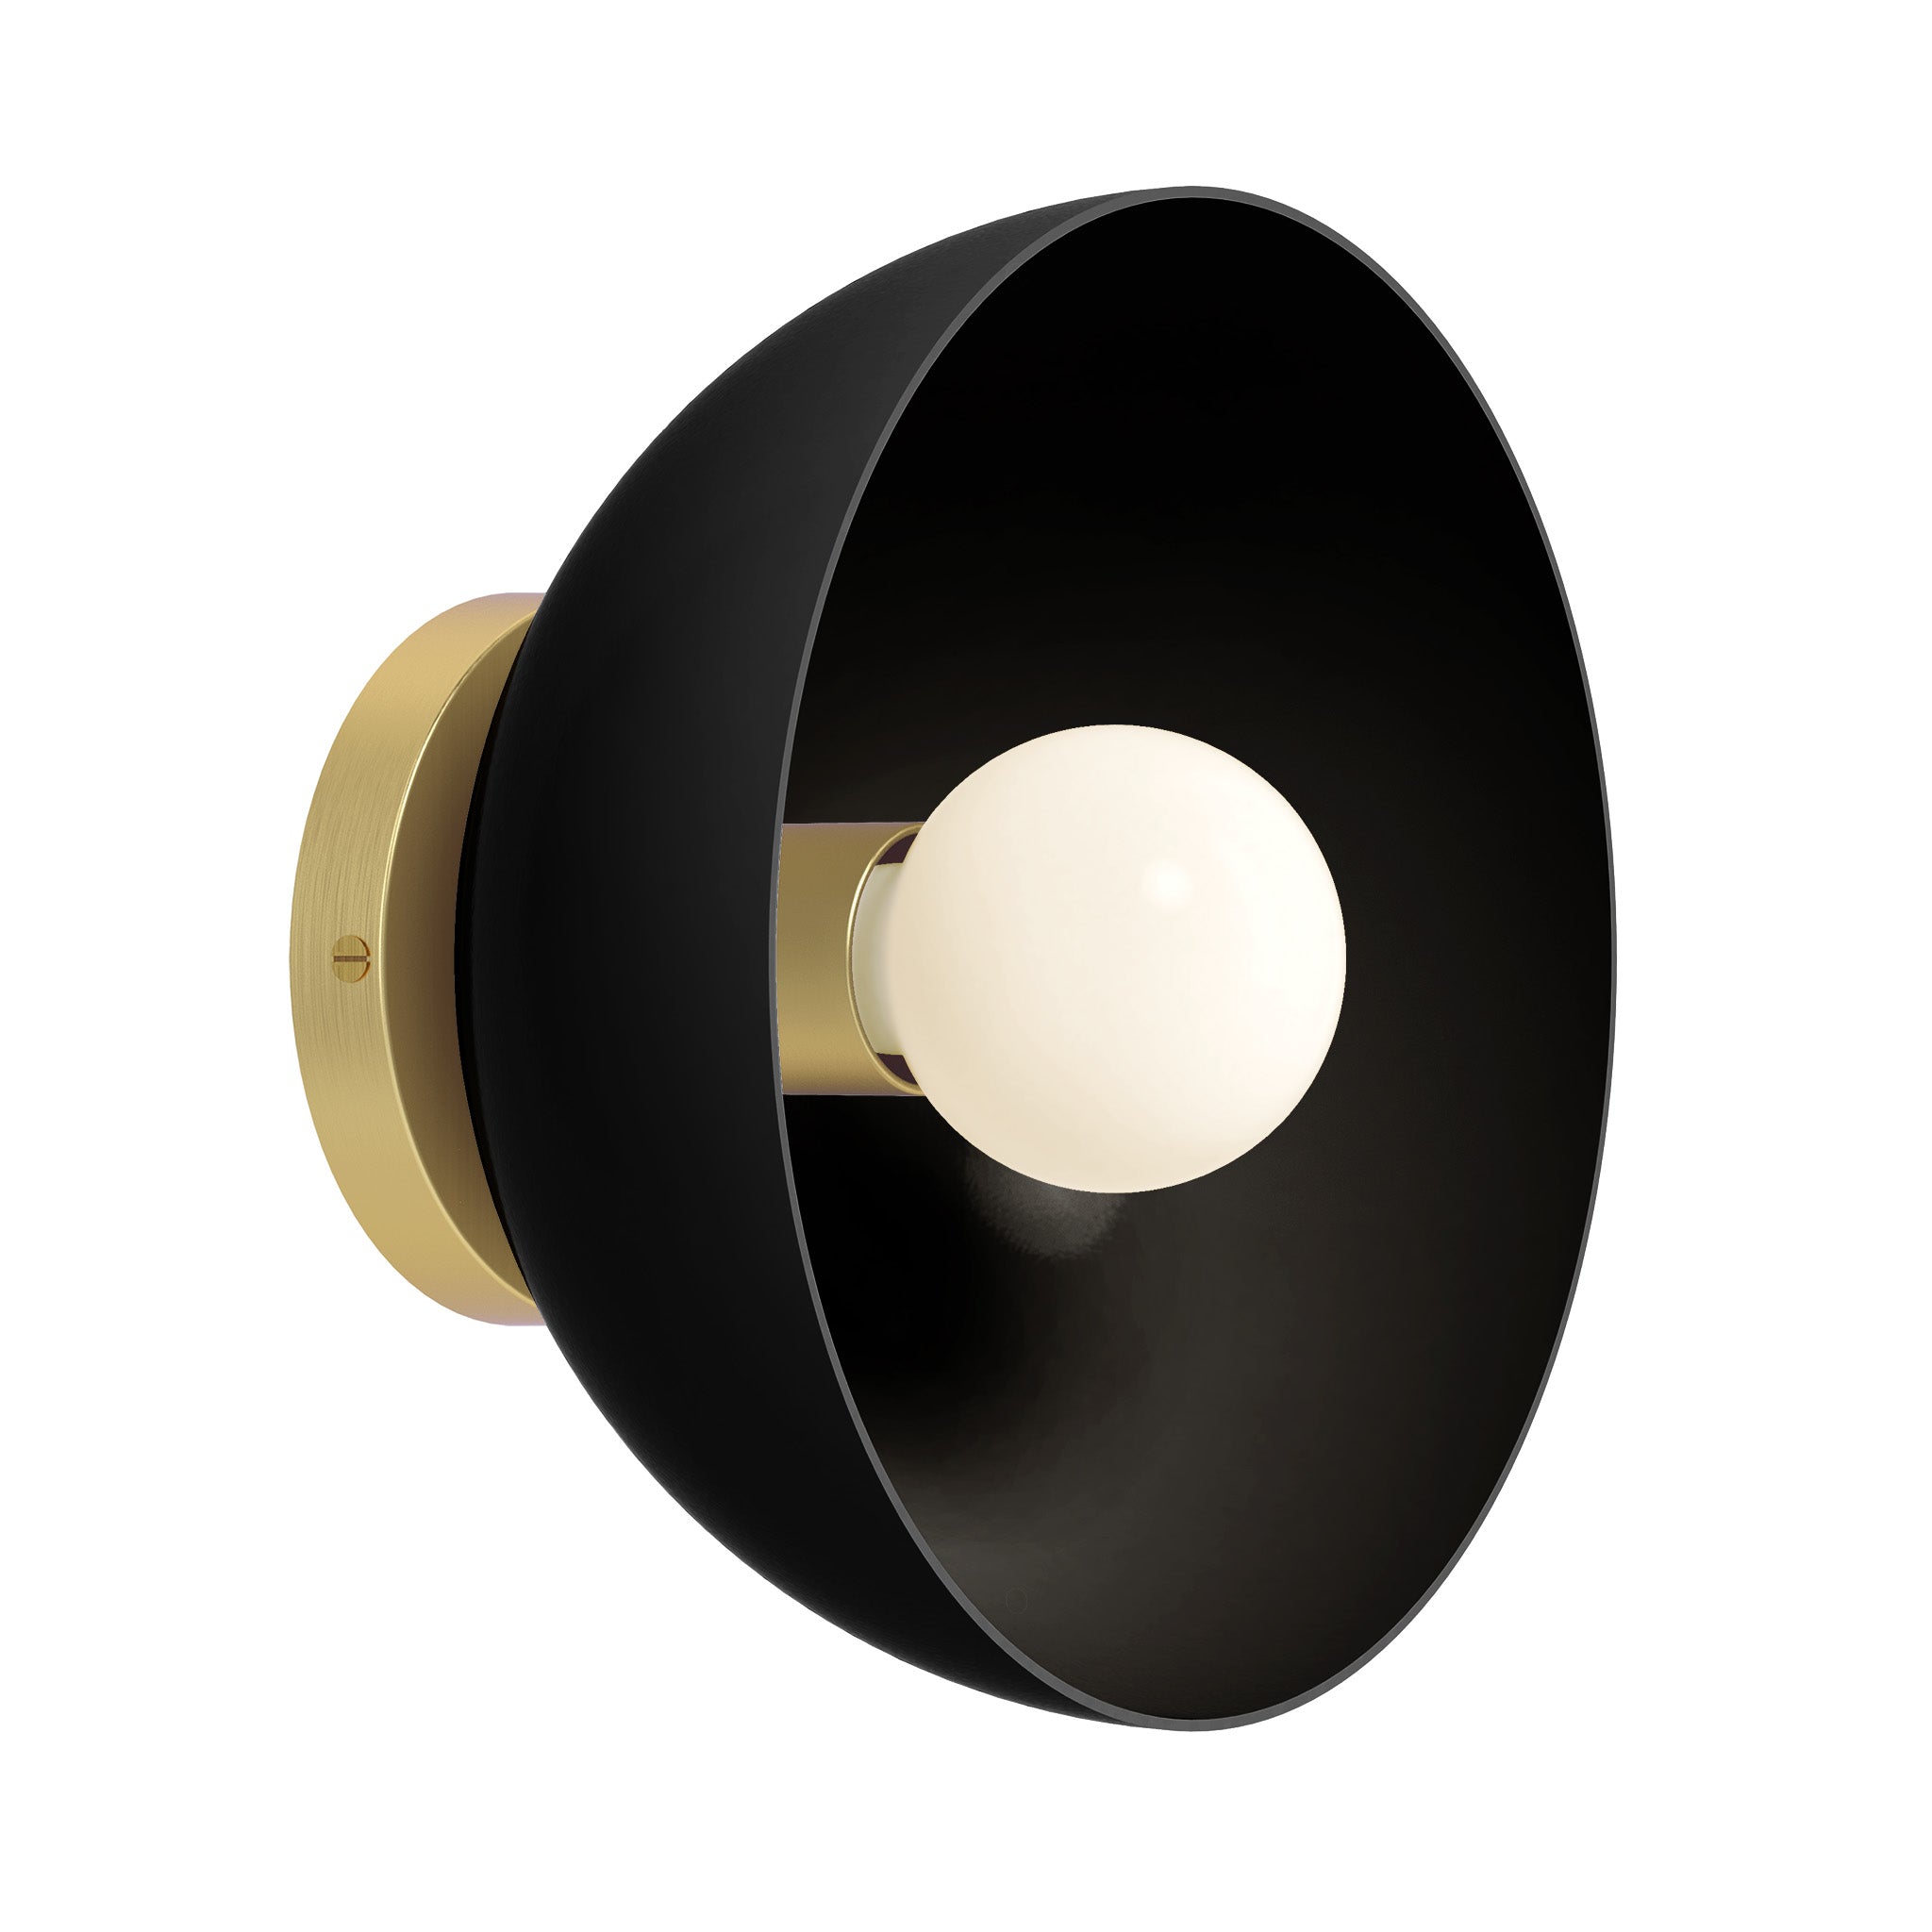 Brass and black color hemi dome sconce 10" Dutton Brown lighting